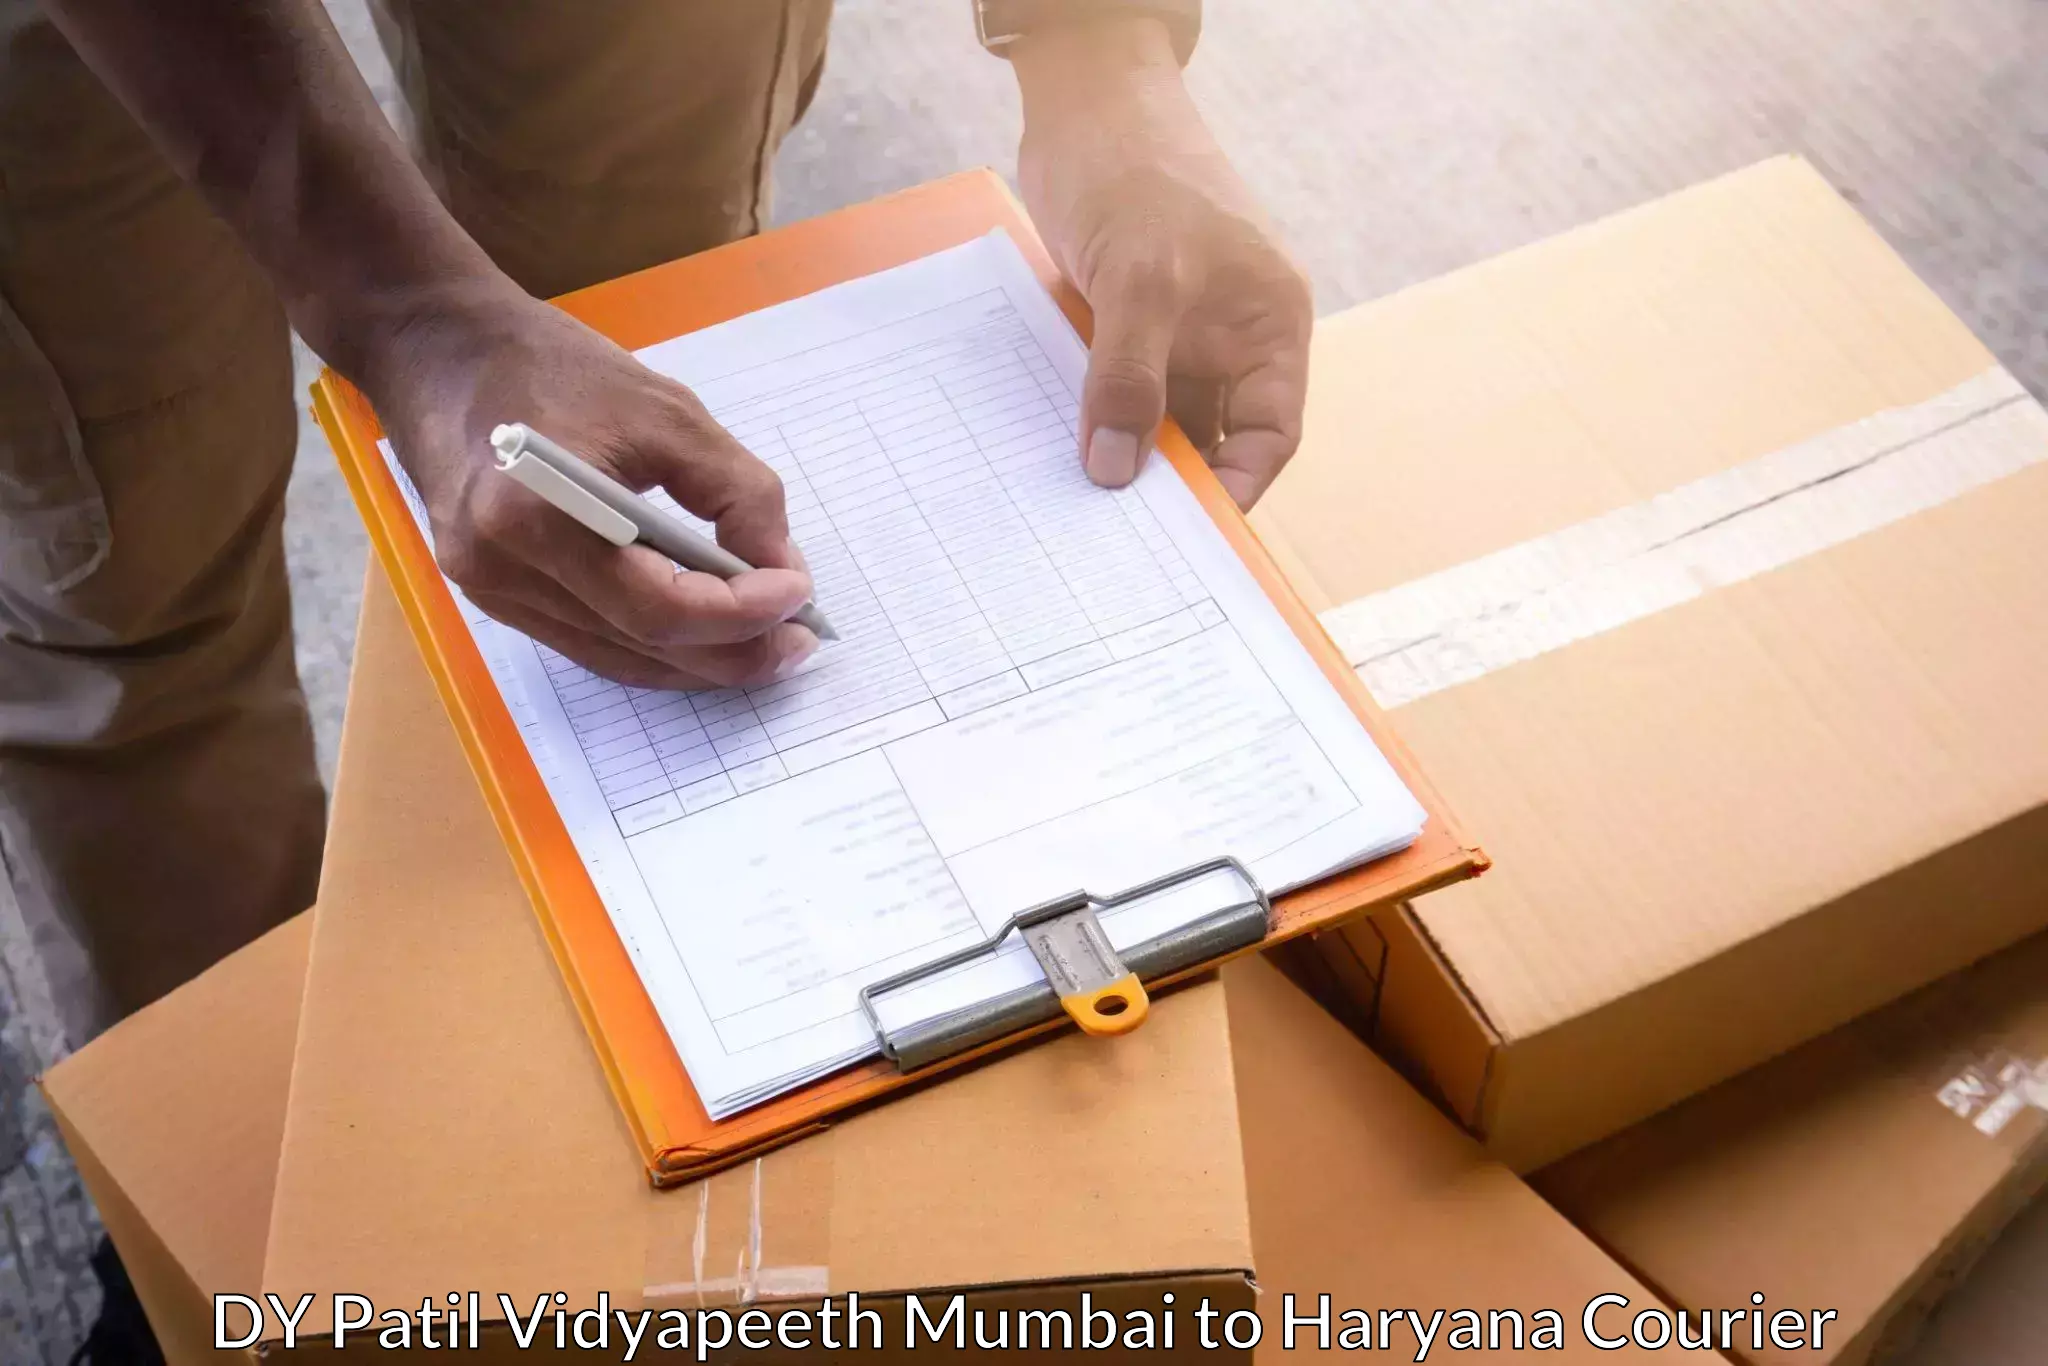 Medical delivery services DY Patil Vidyapeeth Mumbai to Haryana